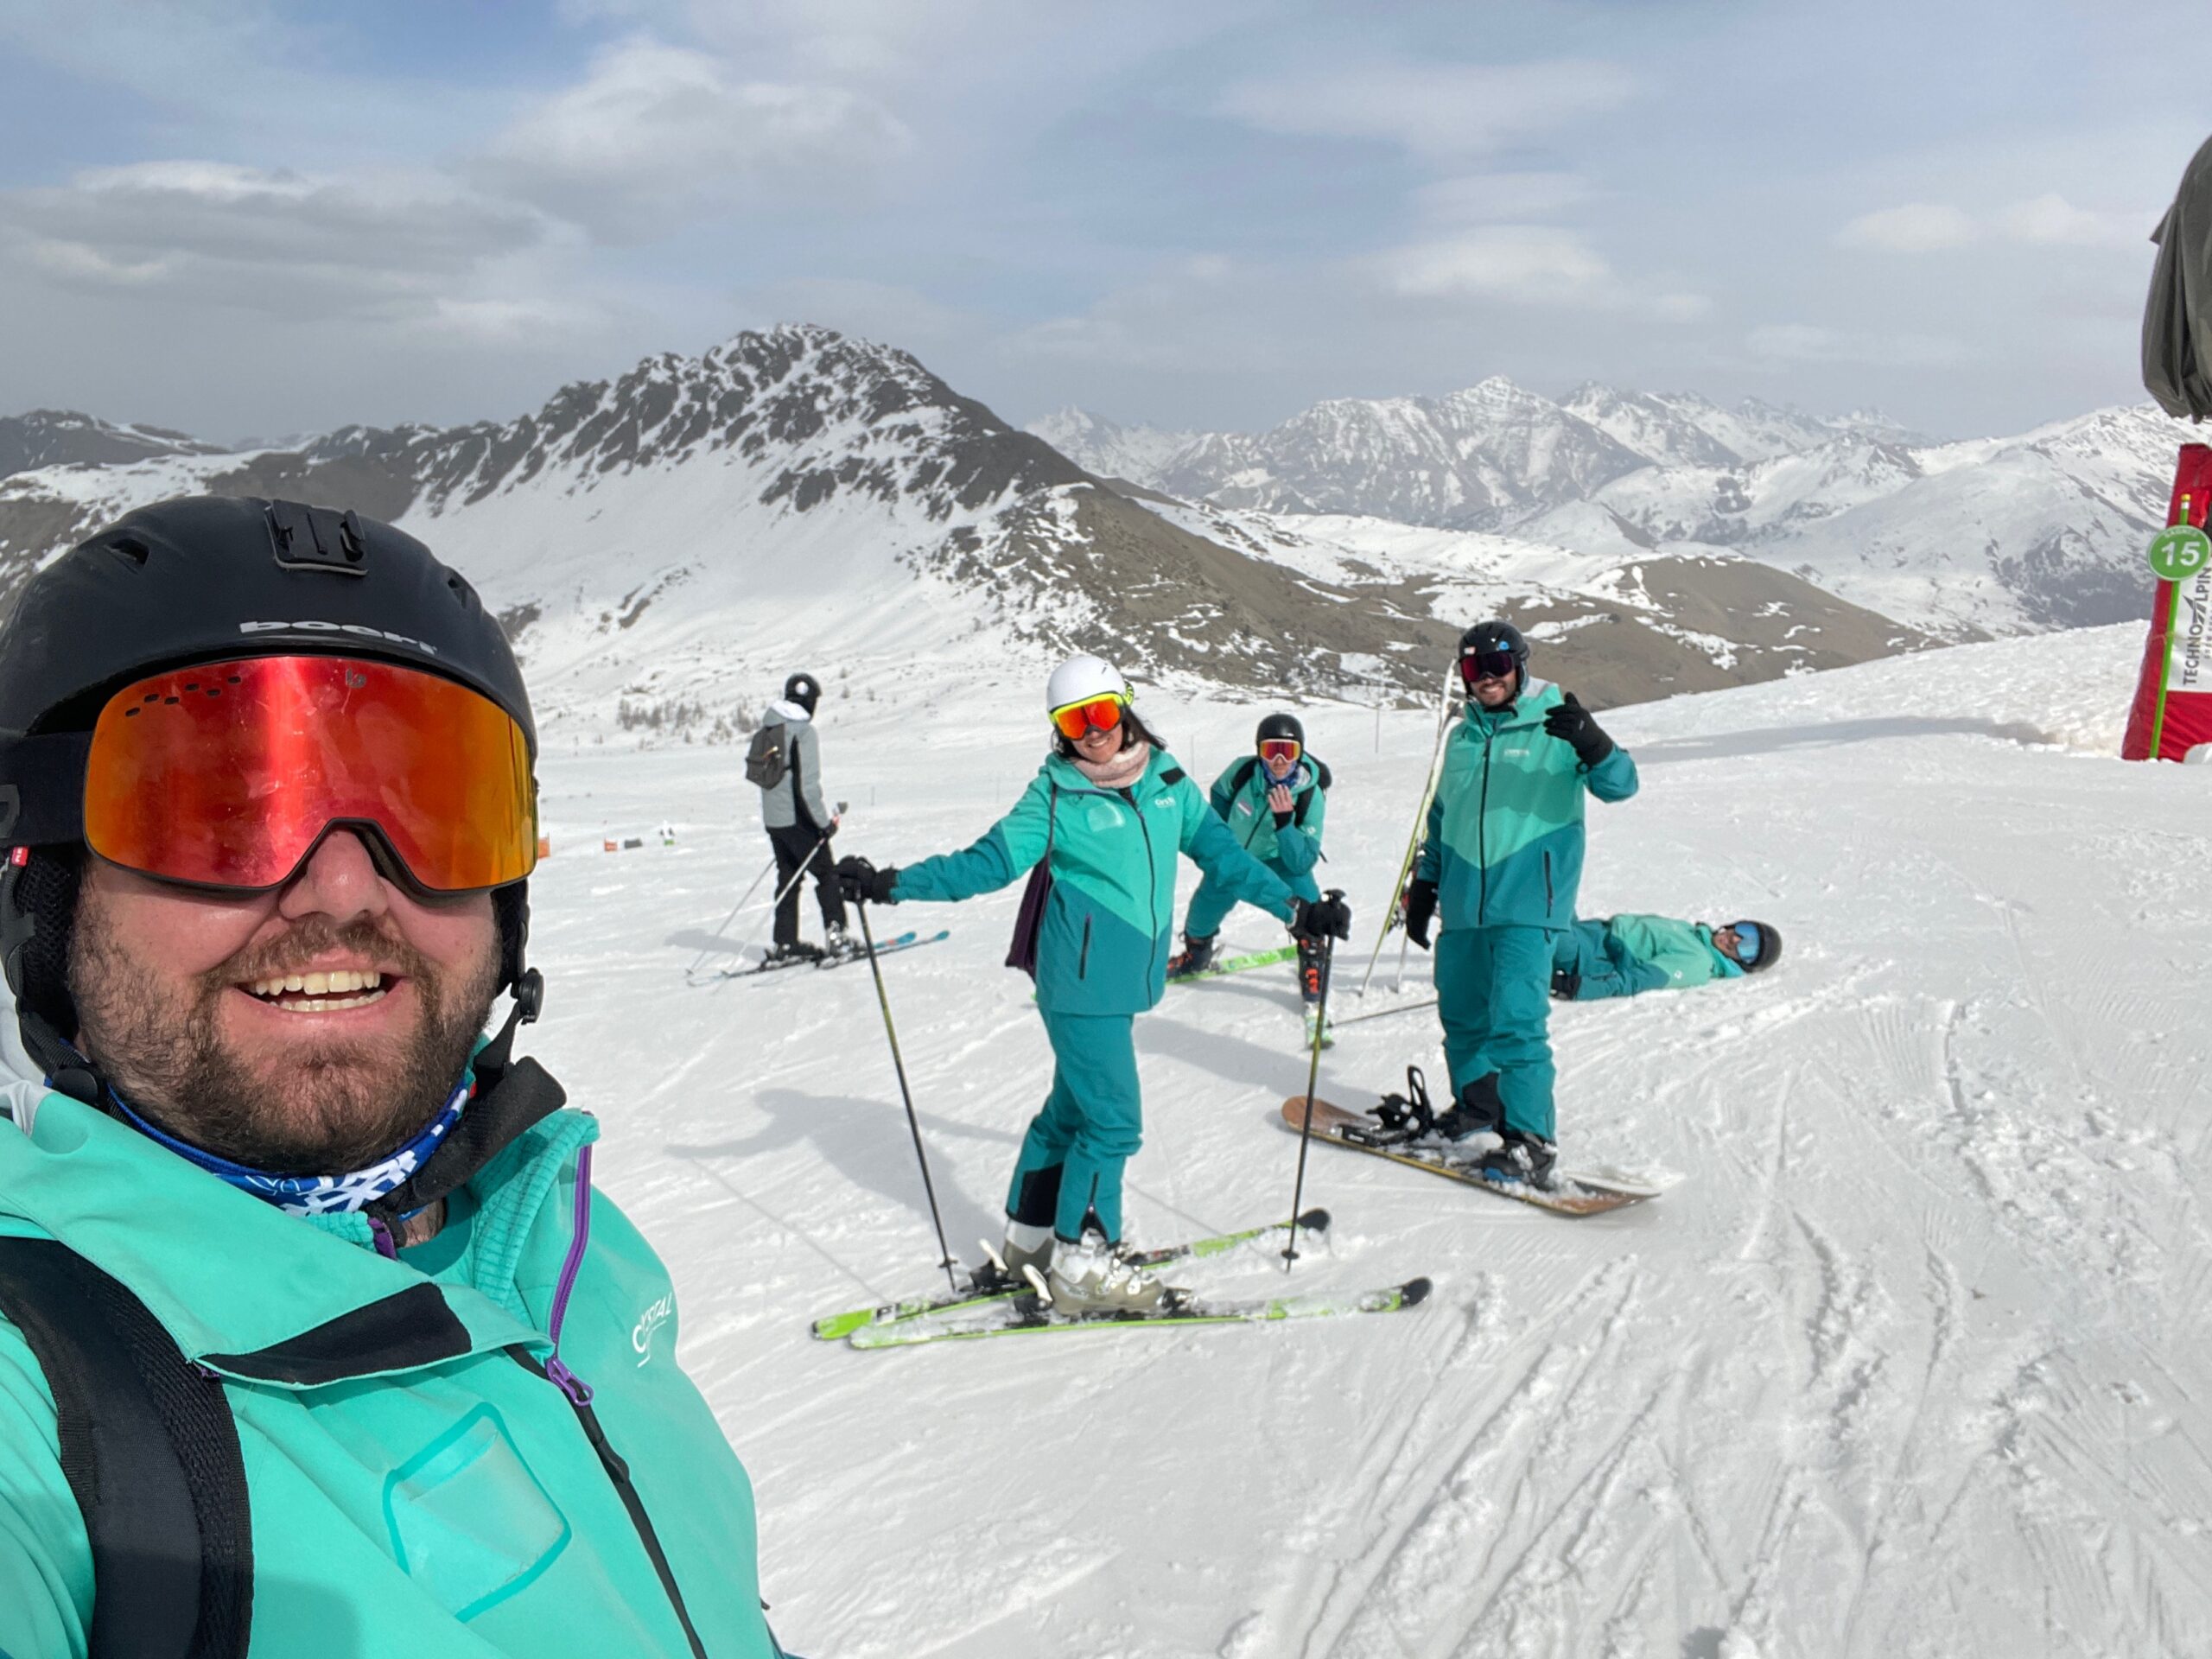 Ski reps on a mountain smiling and laughing. The Ski Reps are stood still wearing goggles and Green Uniforms with the snowy mountain in the background.